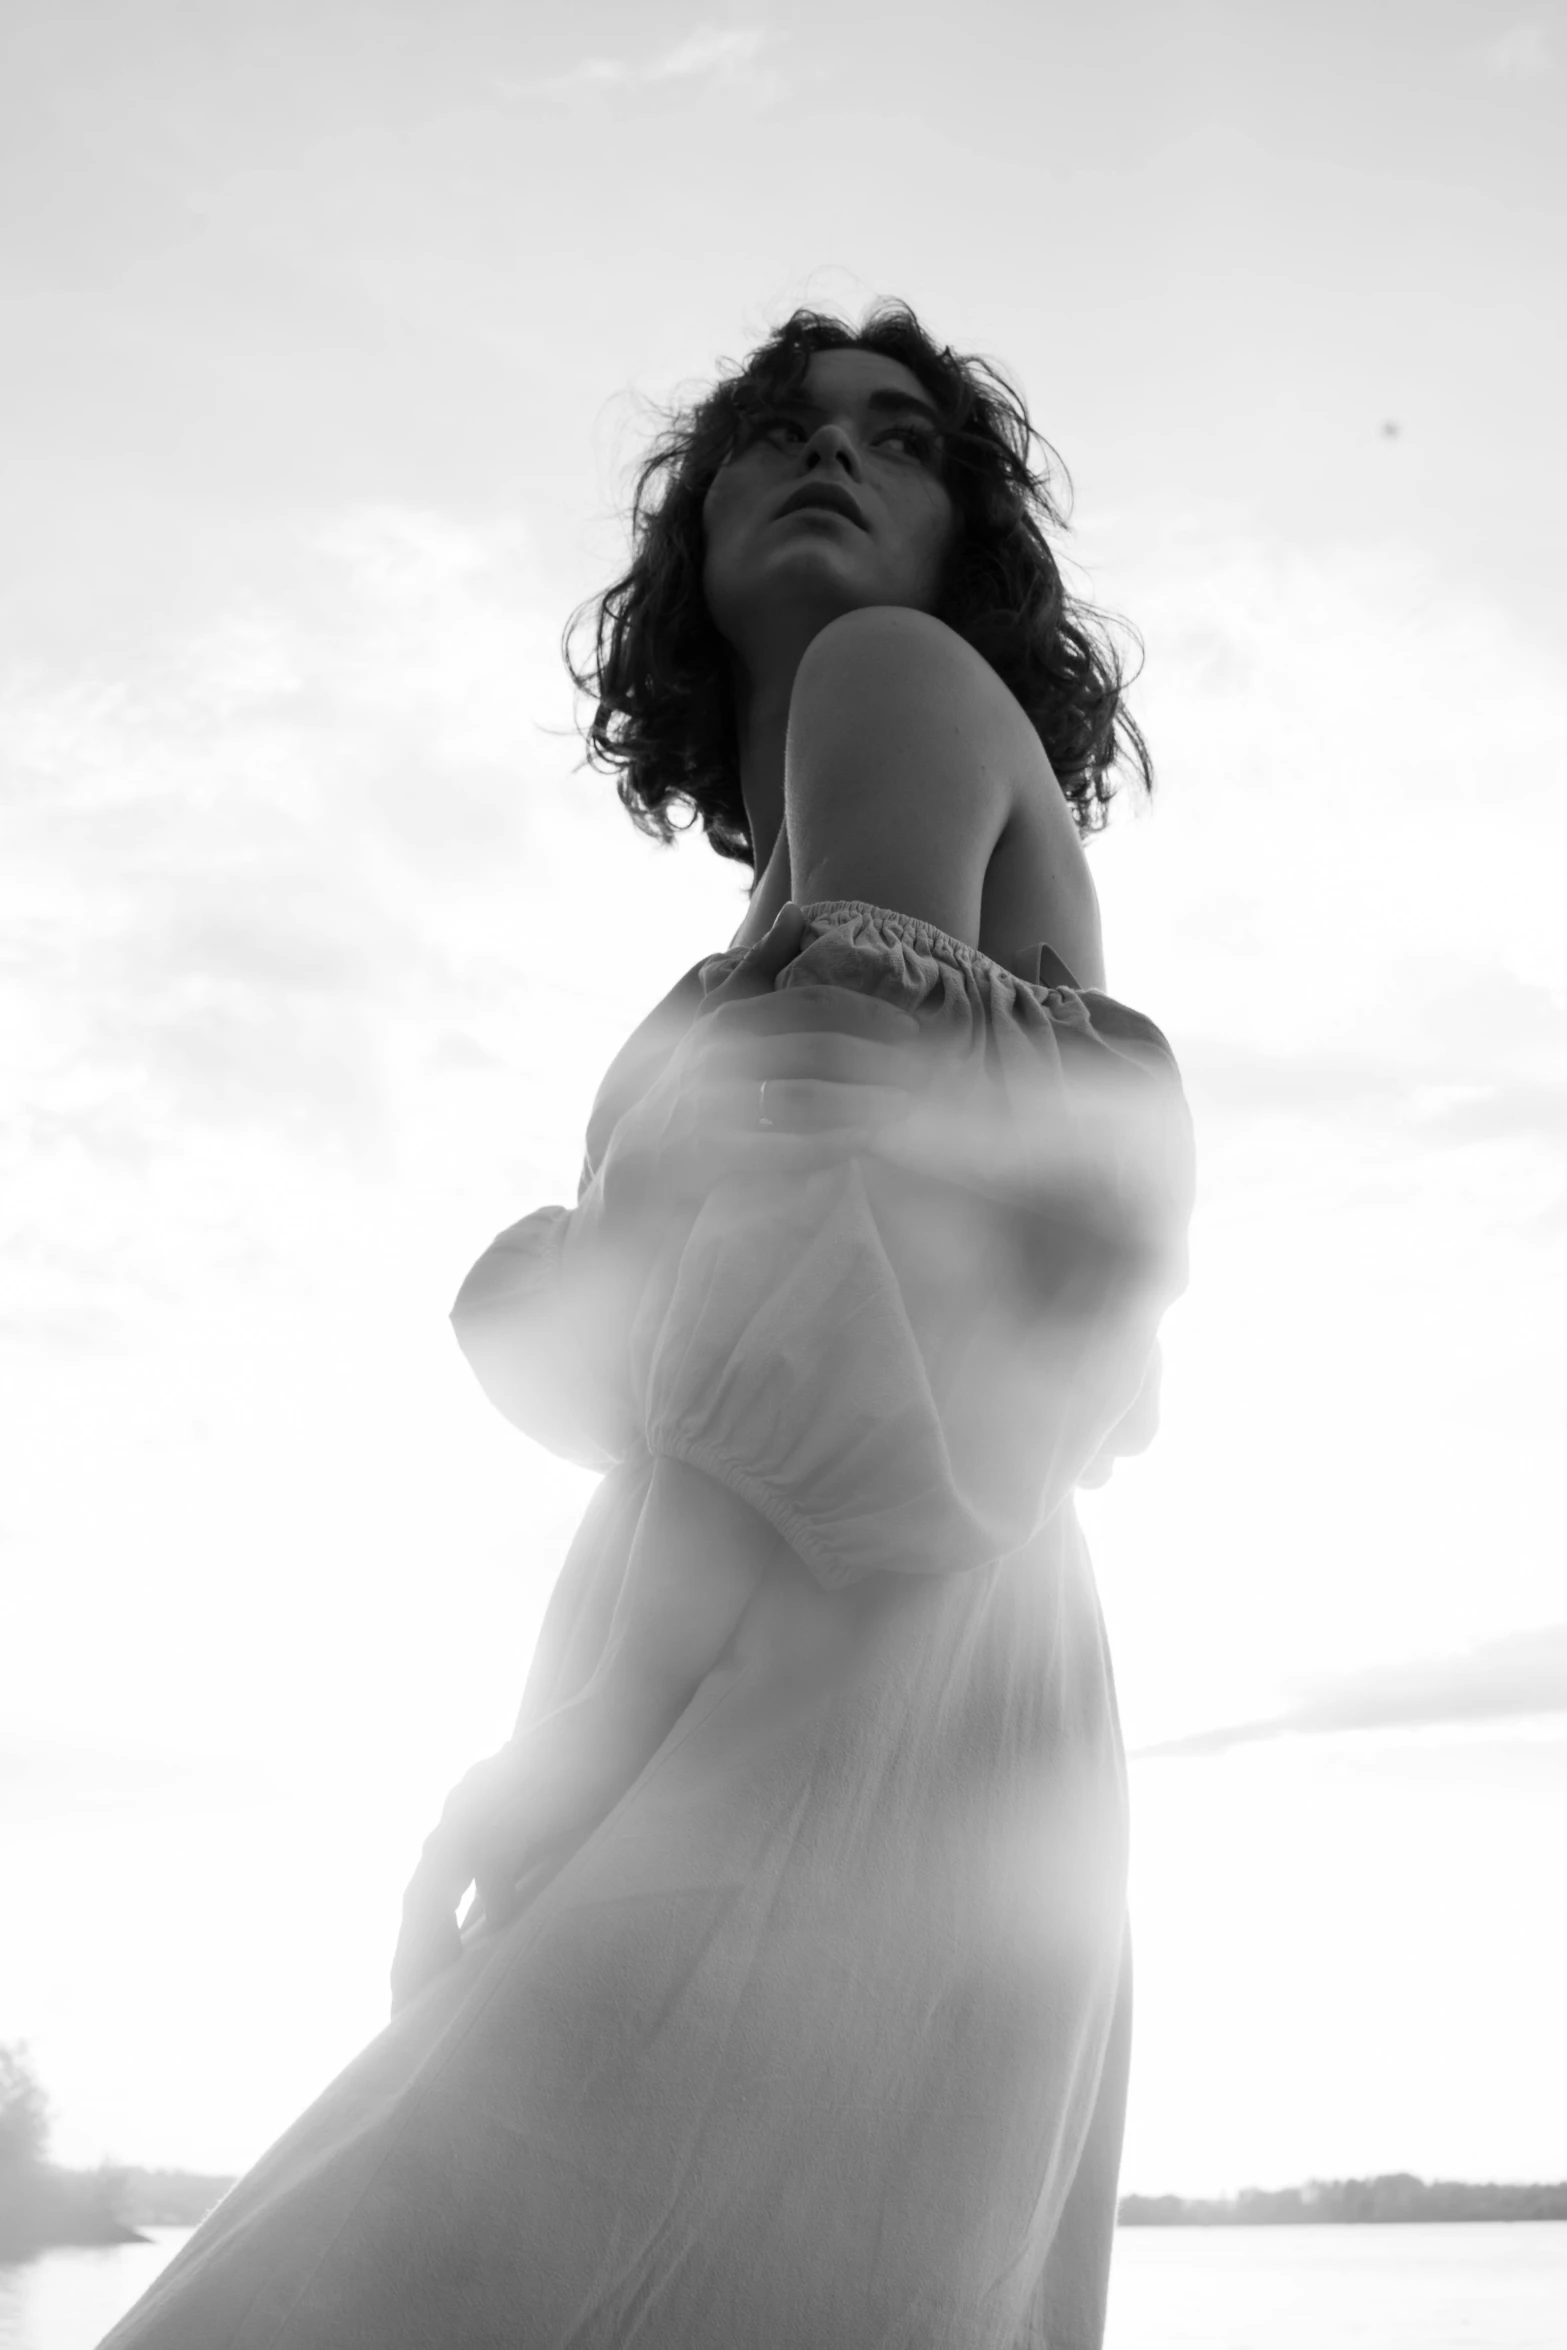 a woman standing on top of a beach next to the ocean, a black and white photo, inspired by Max Dupain, with haunted eyes and curly hair, ethereal angelic being of light, alternate album cover, nathalie emmanuel